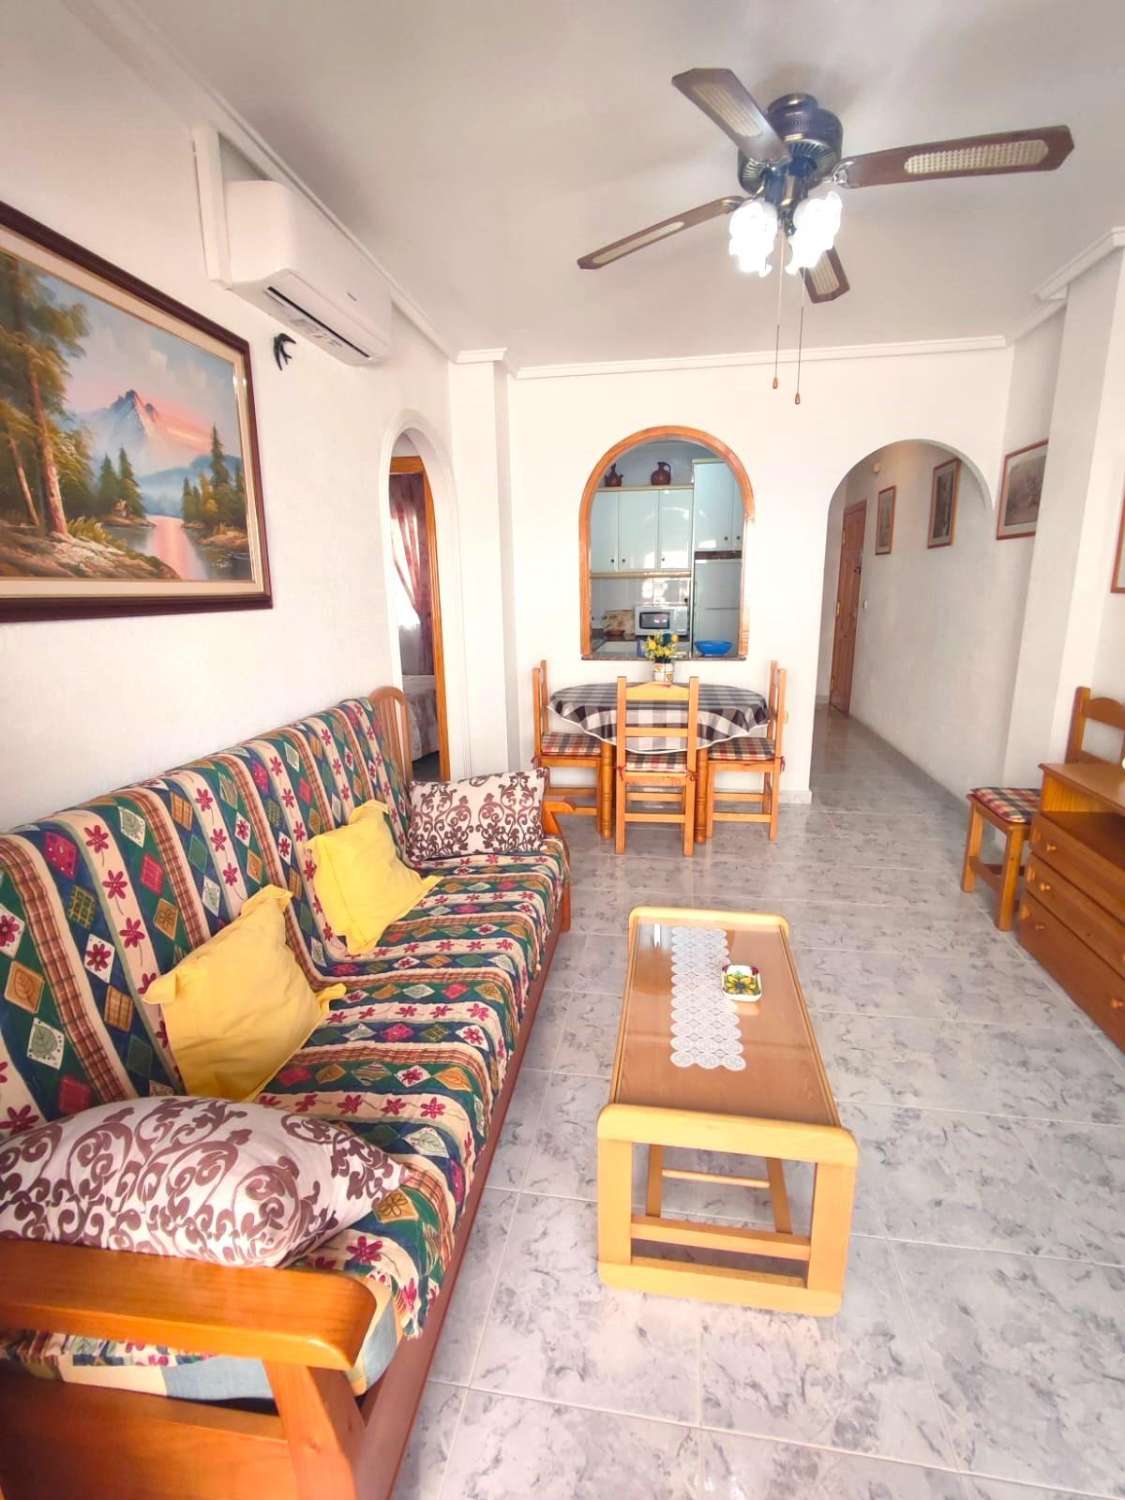 2 BEDROOM APARTMENT WITH POOL AND CLOSE TO THE BEACH